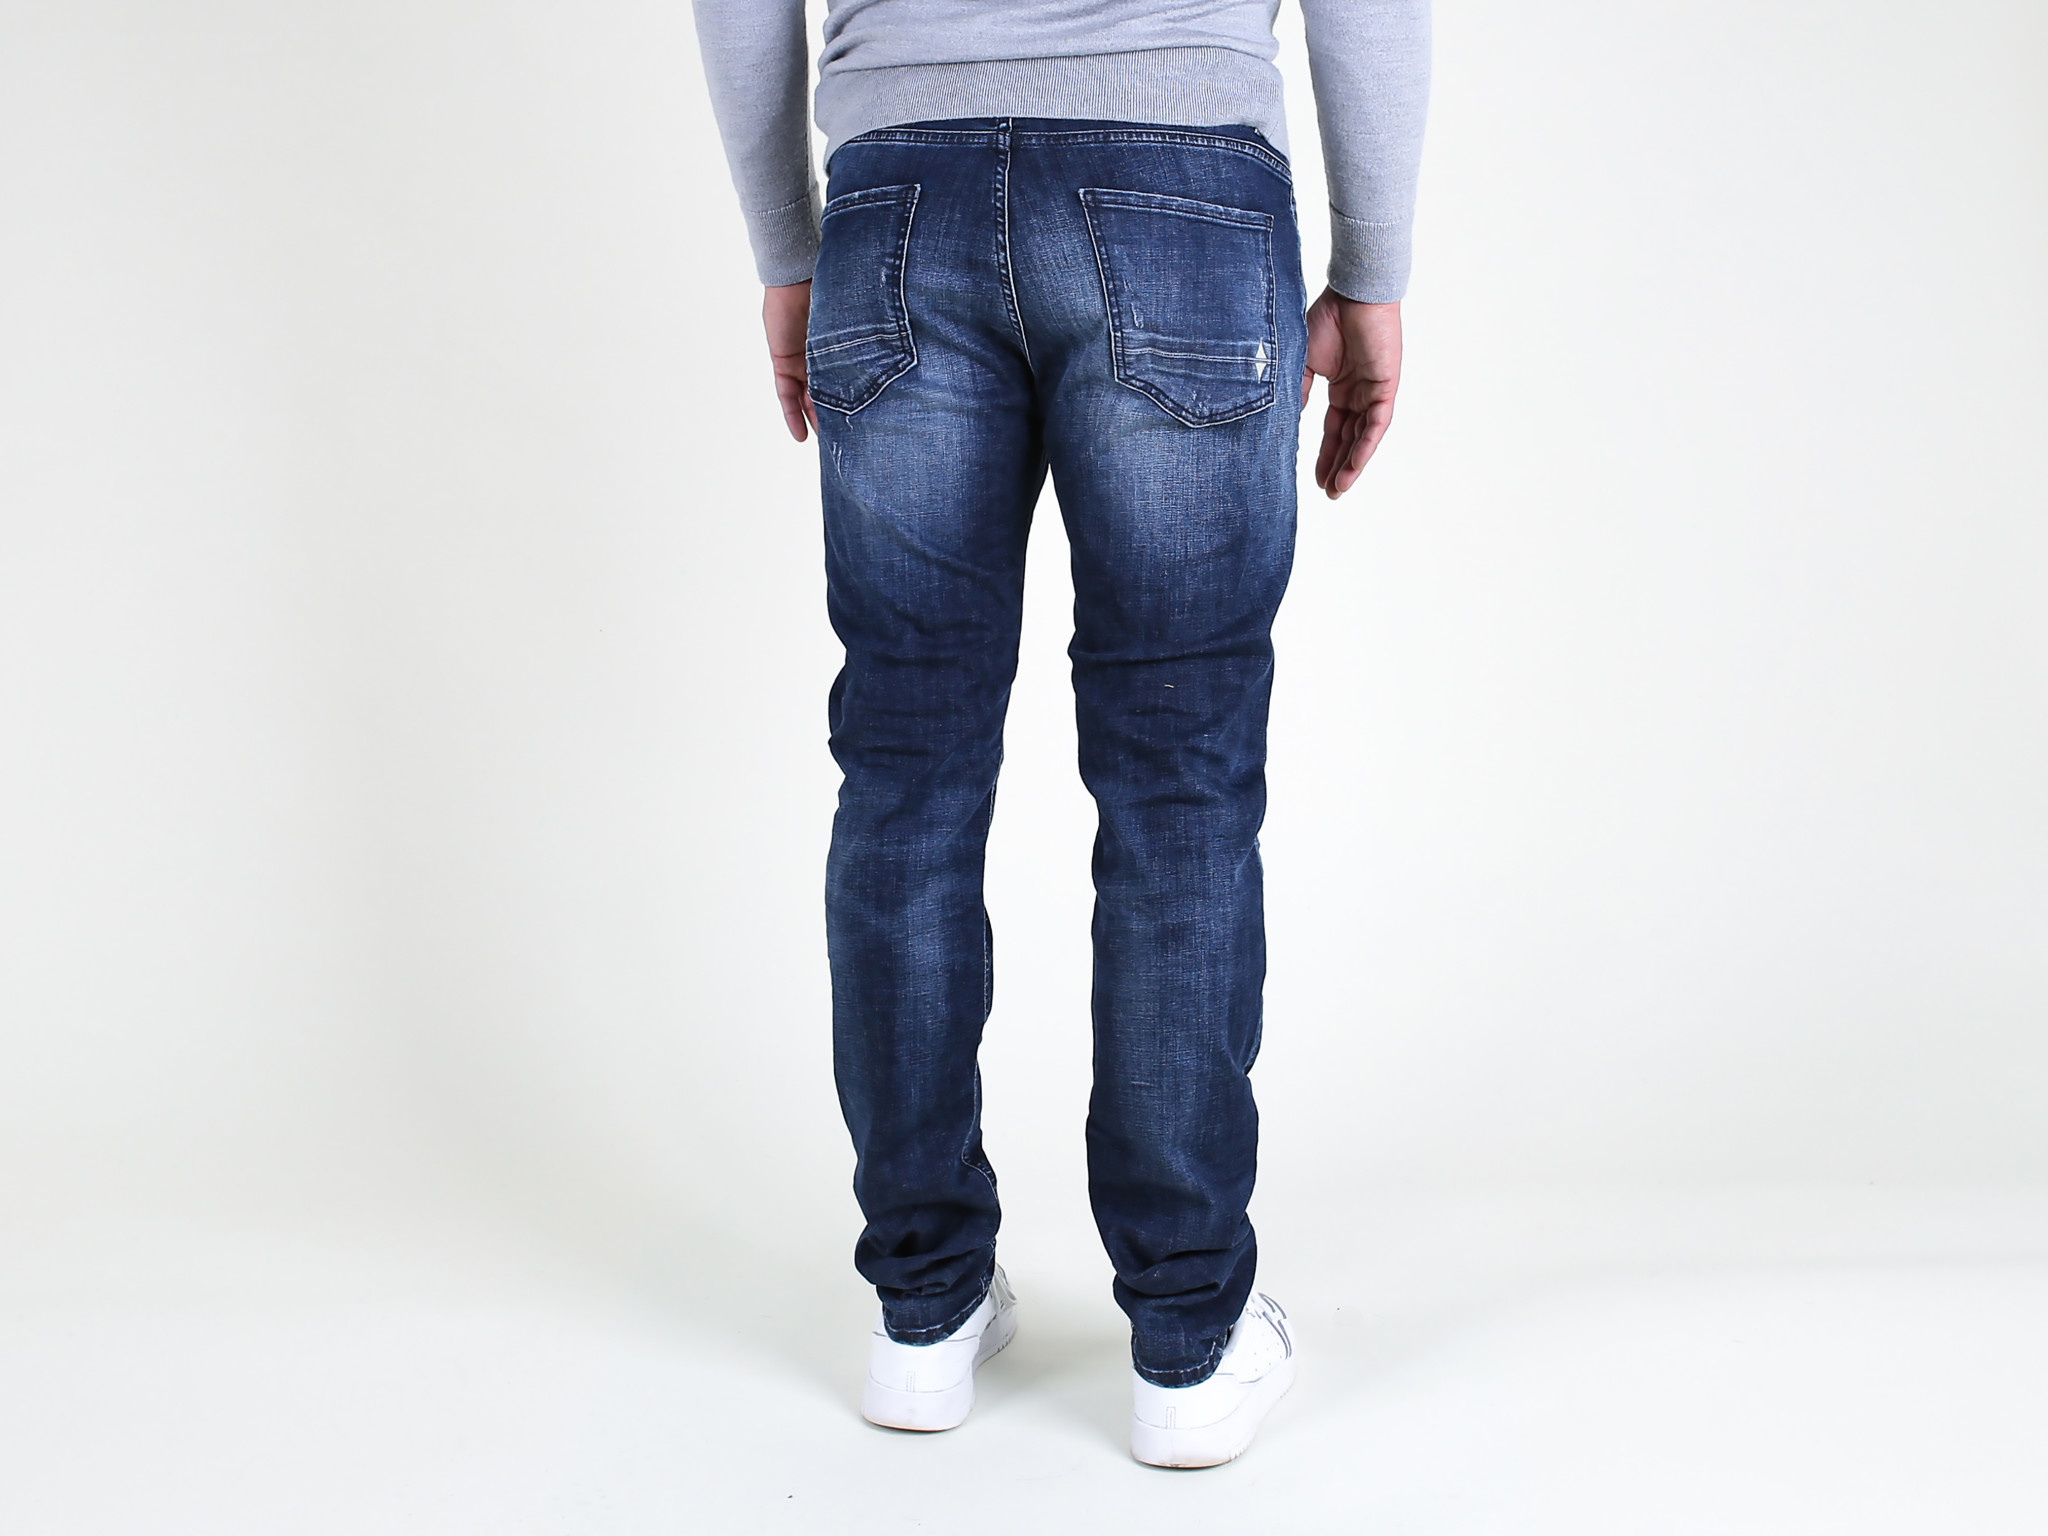 Fifty Four Fifty Four Rages JD81 T41 Slim Fit Jeans Damaged Blue